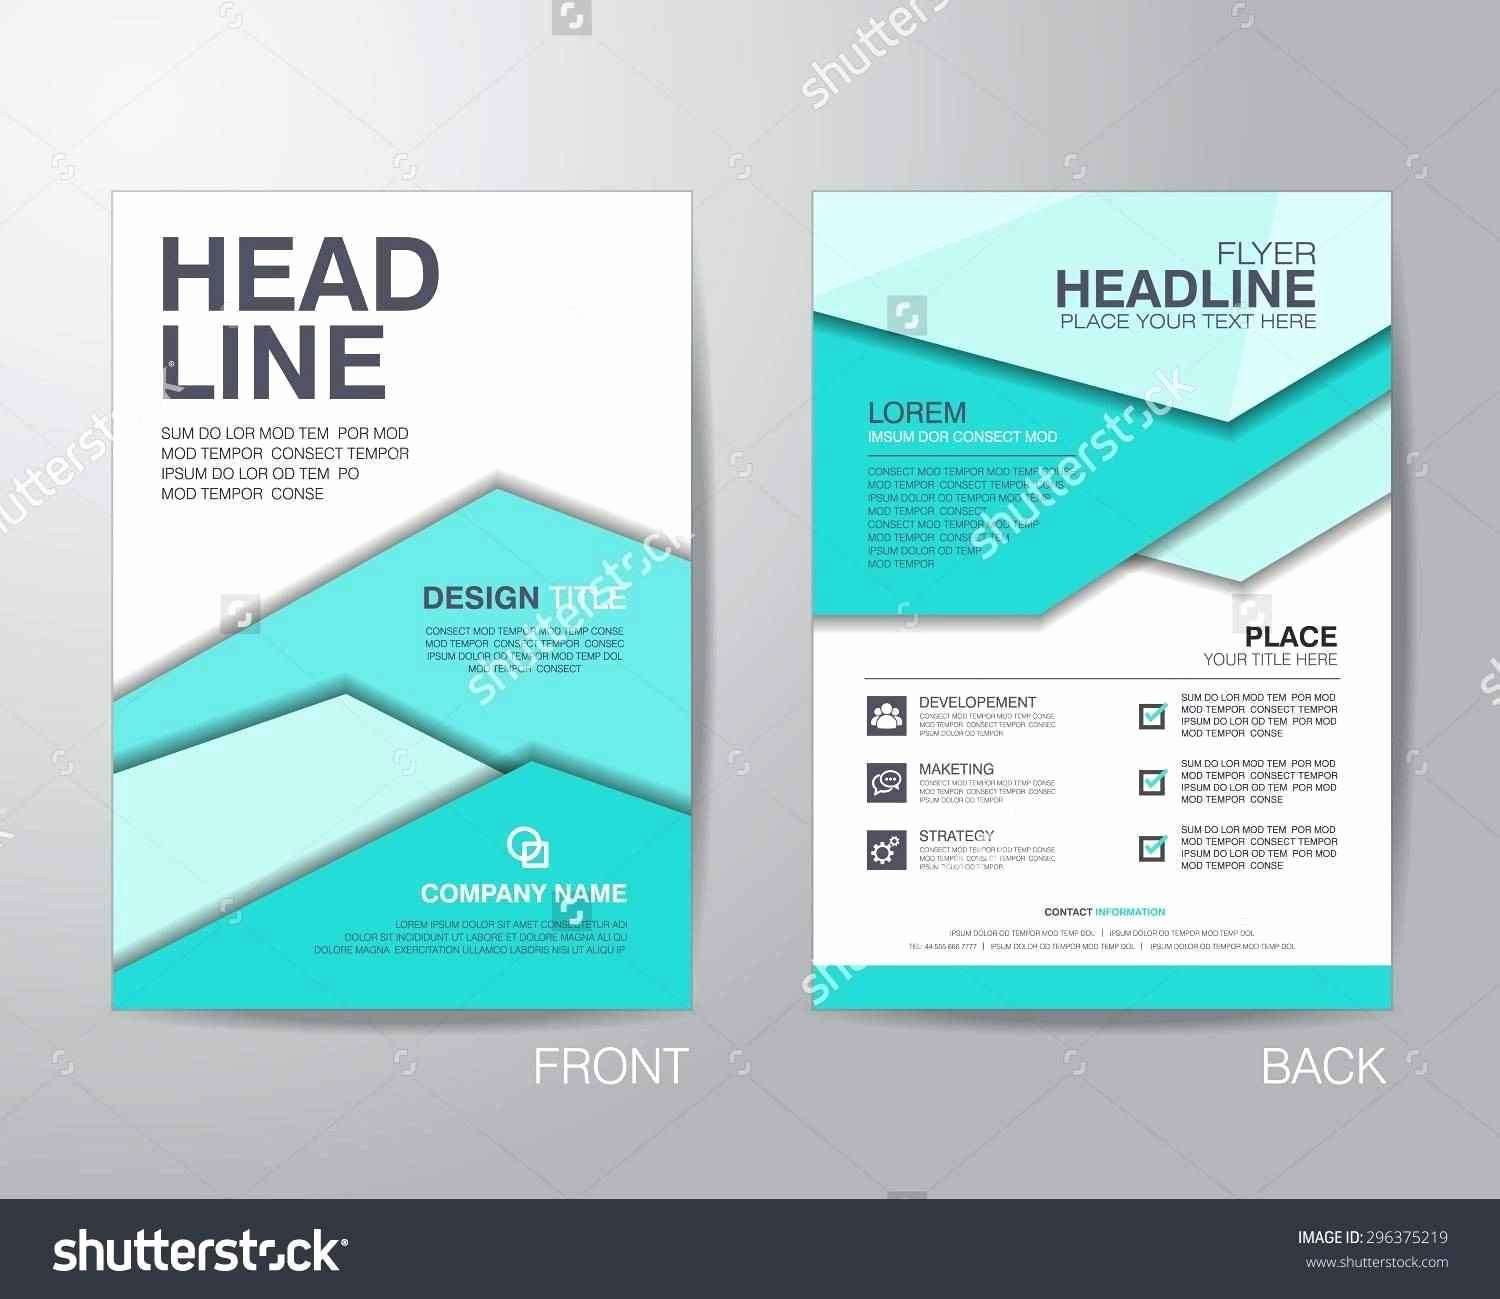 indesign business card template awesome trifold business card template beautiful adobe indesign business of indesign business card template